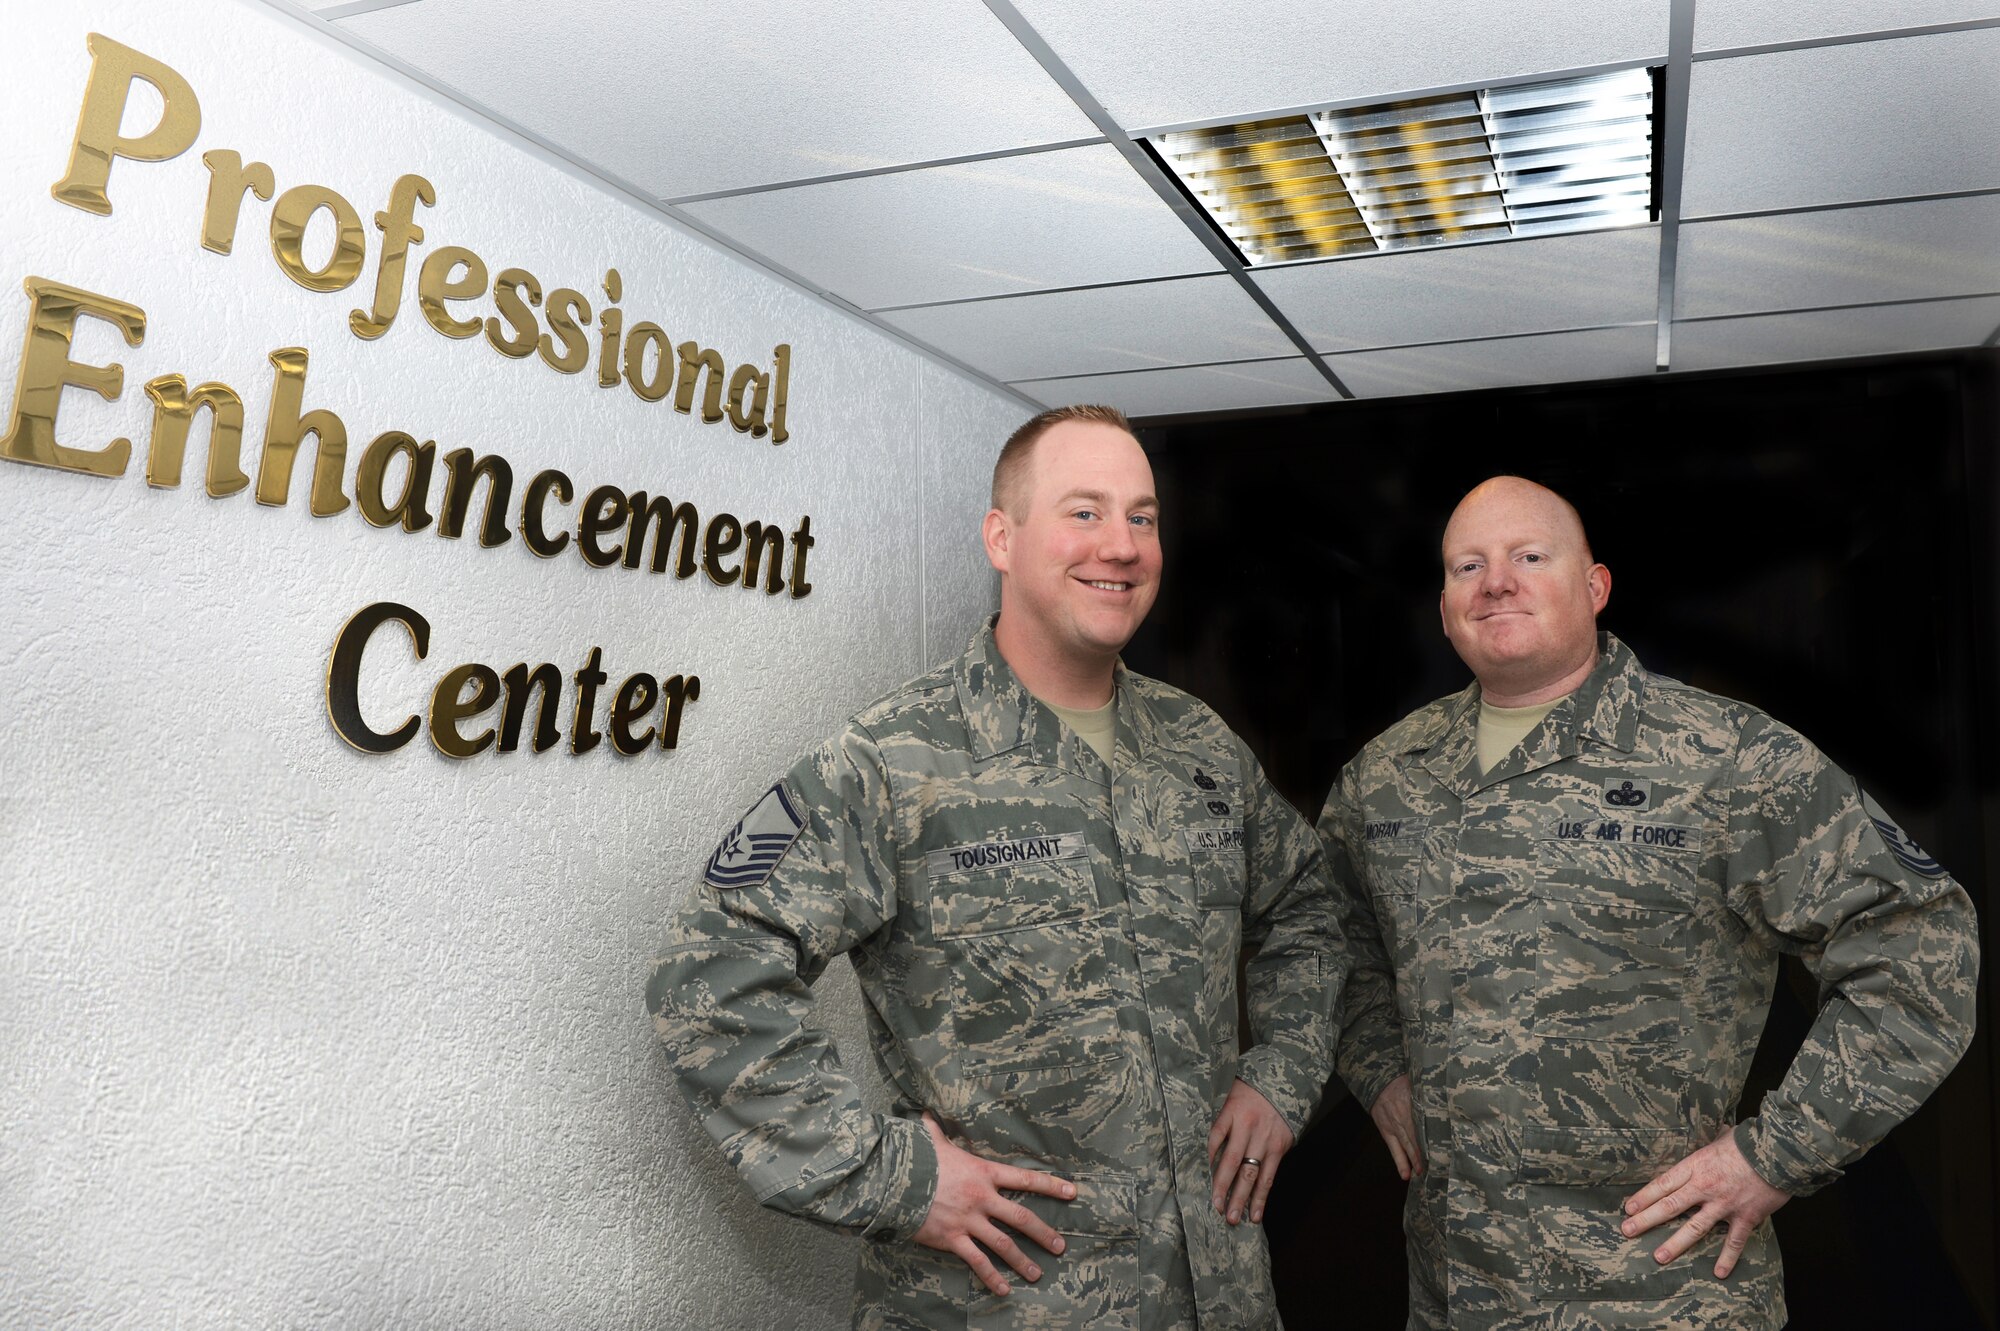 Master Sgt. Etienne Tousignant, (left) and Master Sgt. Jared Moran, both 86th Force Support Squadron career assistance advisors, work with Airmen every day to inform them of their options and benefits. Airmen should be aware of these benefits before making a decision to separate from the Air Force. Both Tousignant and Moran lead the NCO professional enhancement seminars every six weeks. (U.S. Air Force photo/Senior Airman Caitlin O’Neil-McKeown)